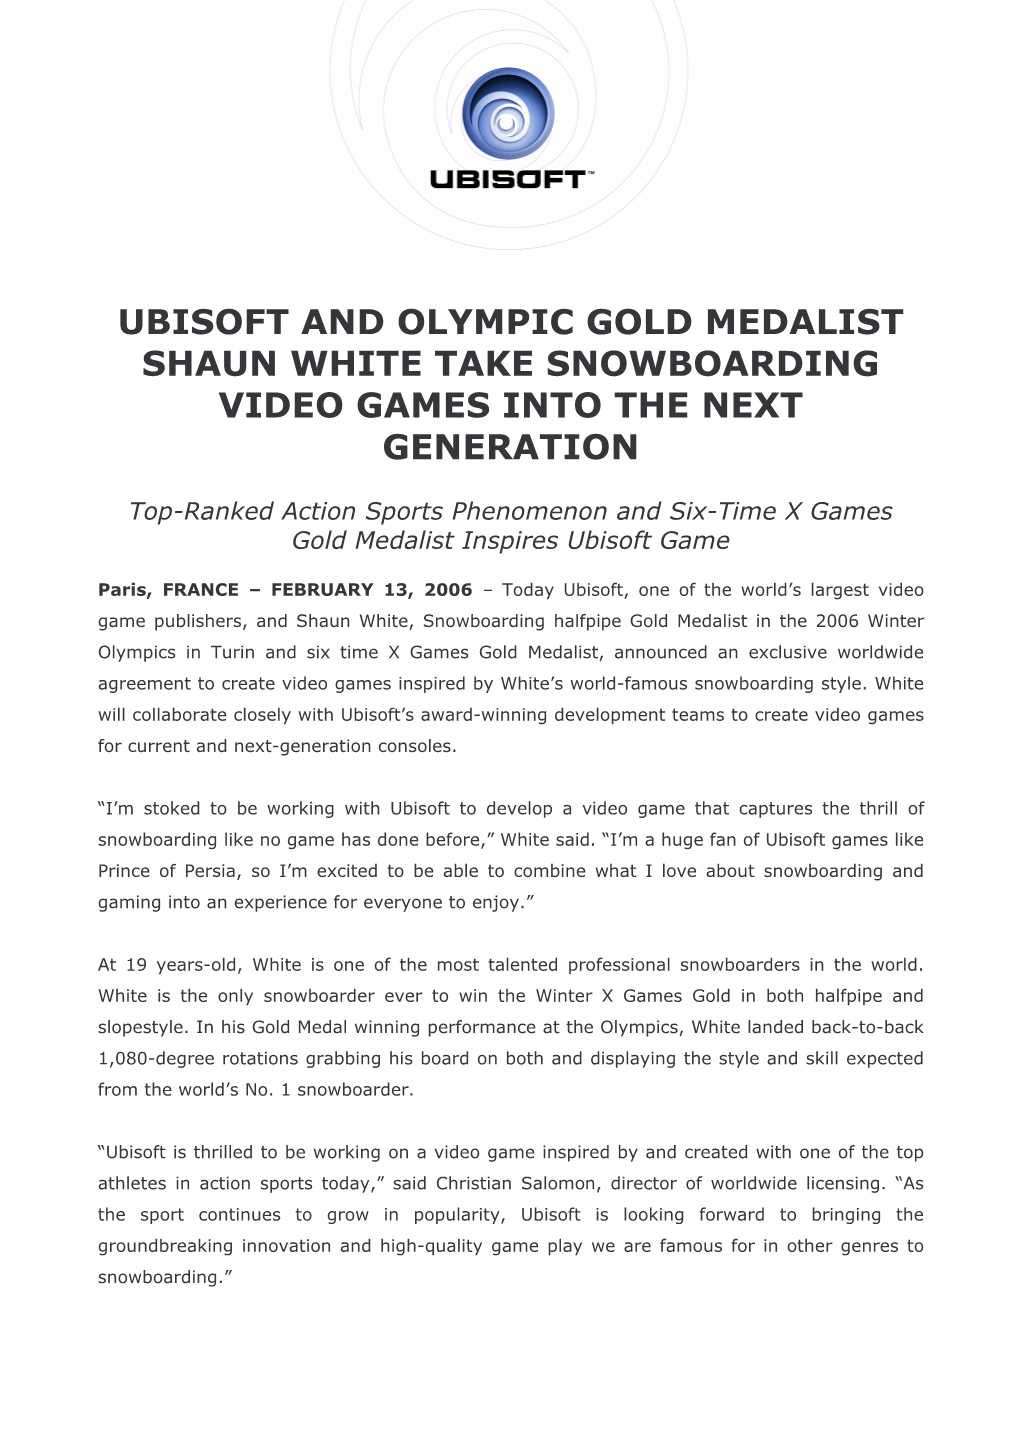 Ubisoft and Olympic Gold Medalist Shaun White Take Snowboarding Video Games Into the Next Generation